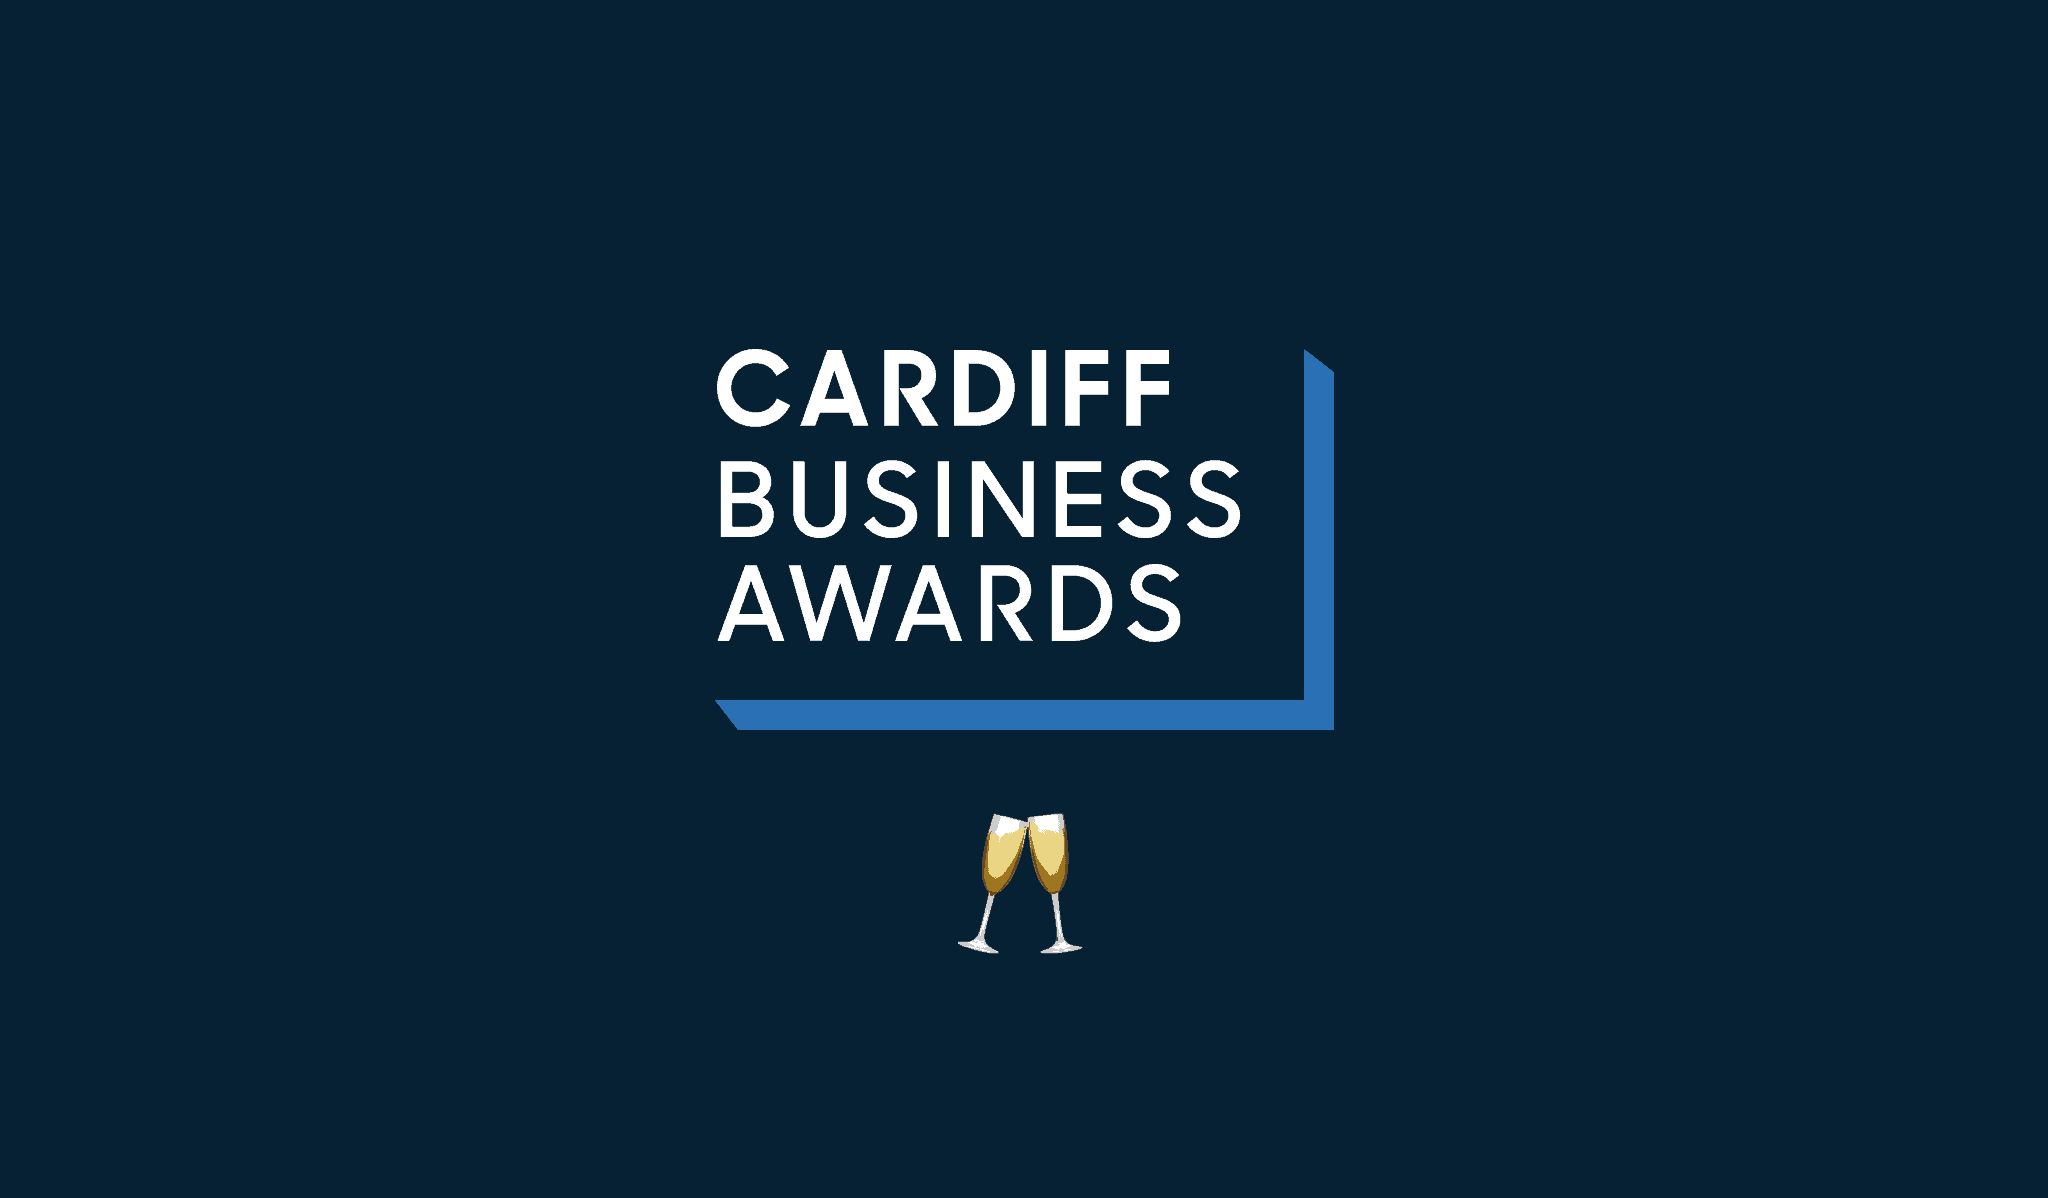 Shortlisted for TWO awards at Cardiff Business Awards 2019!